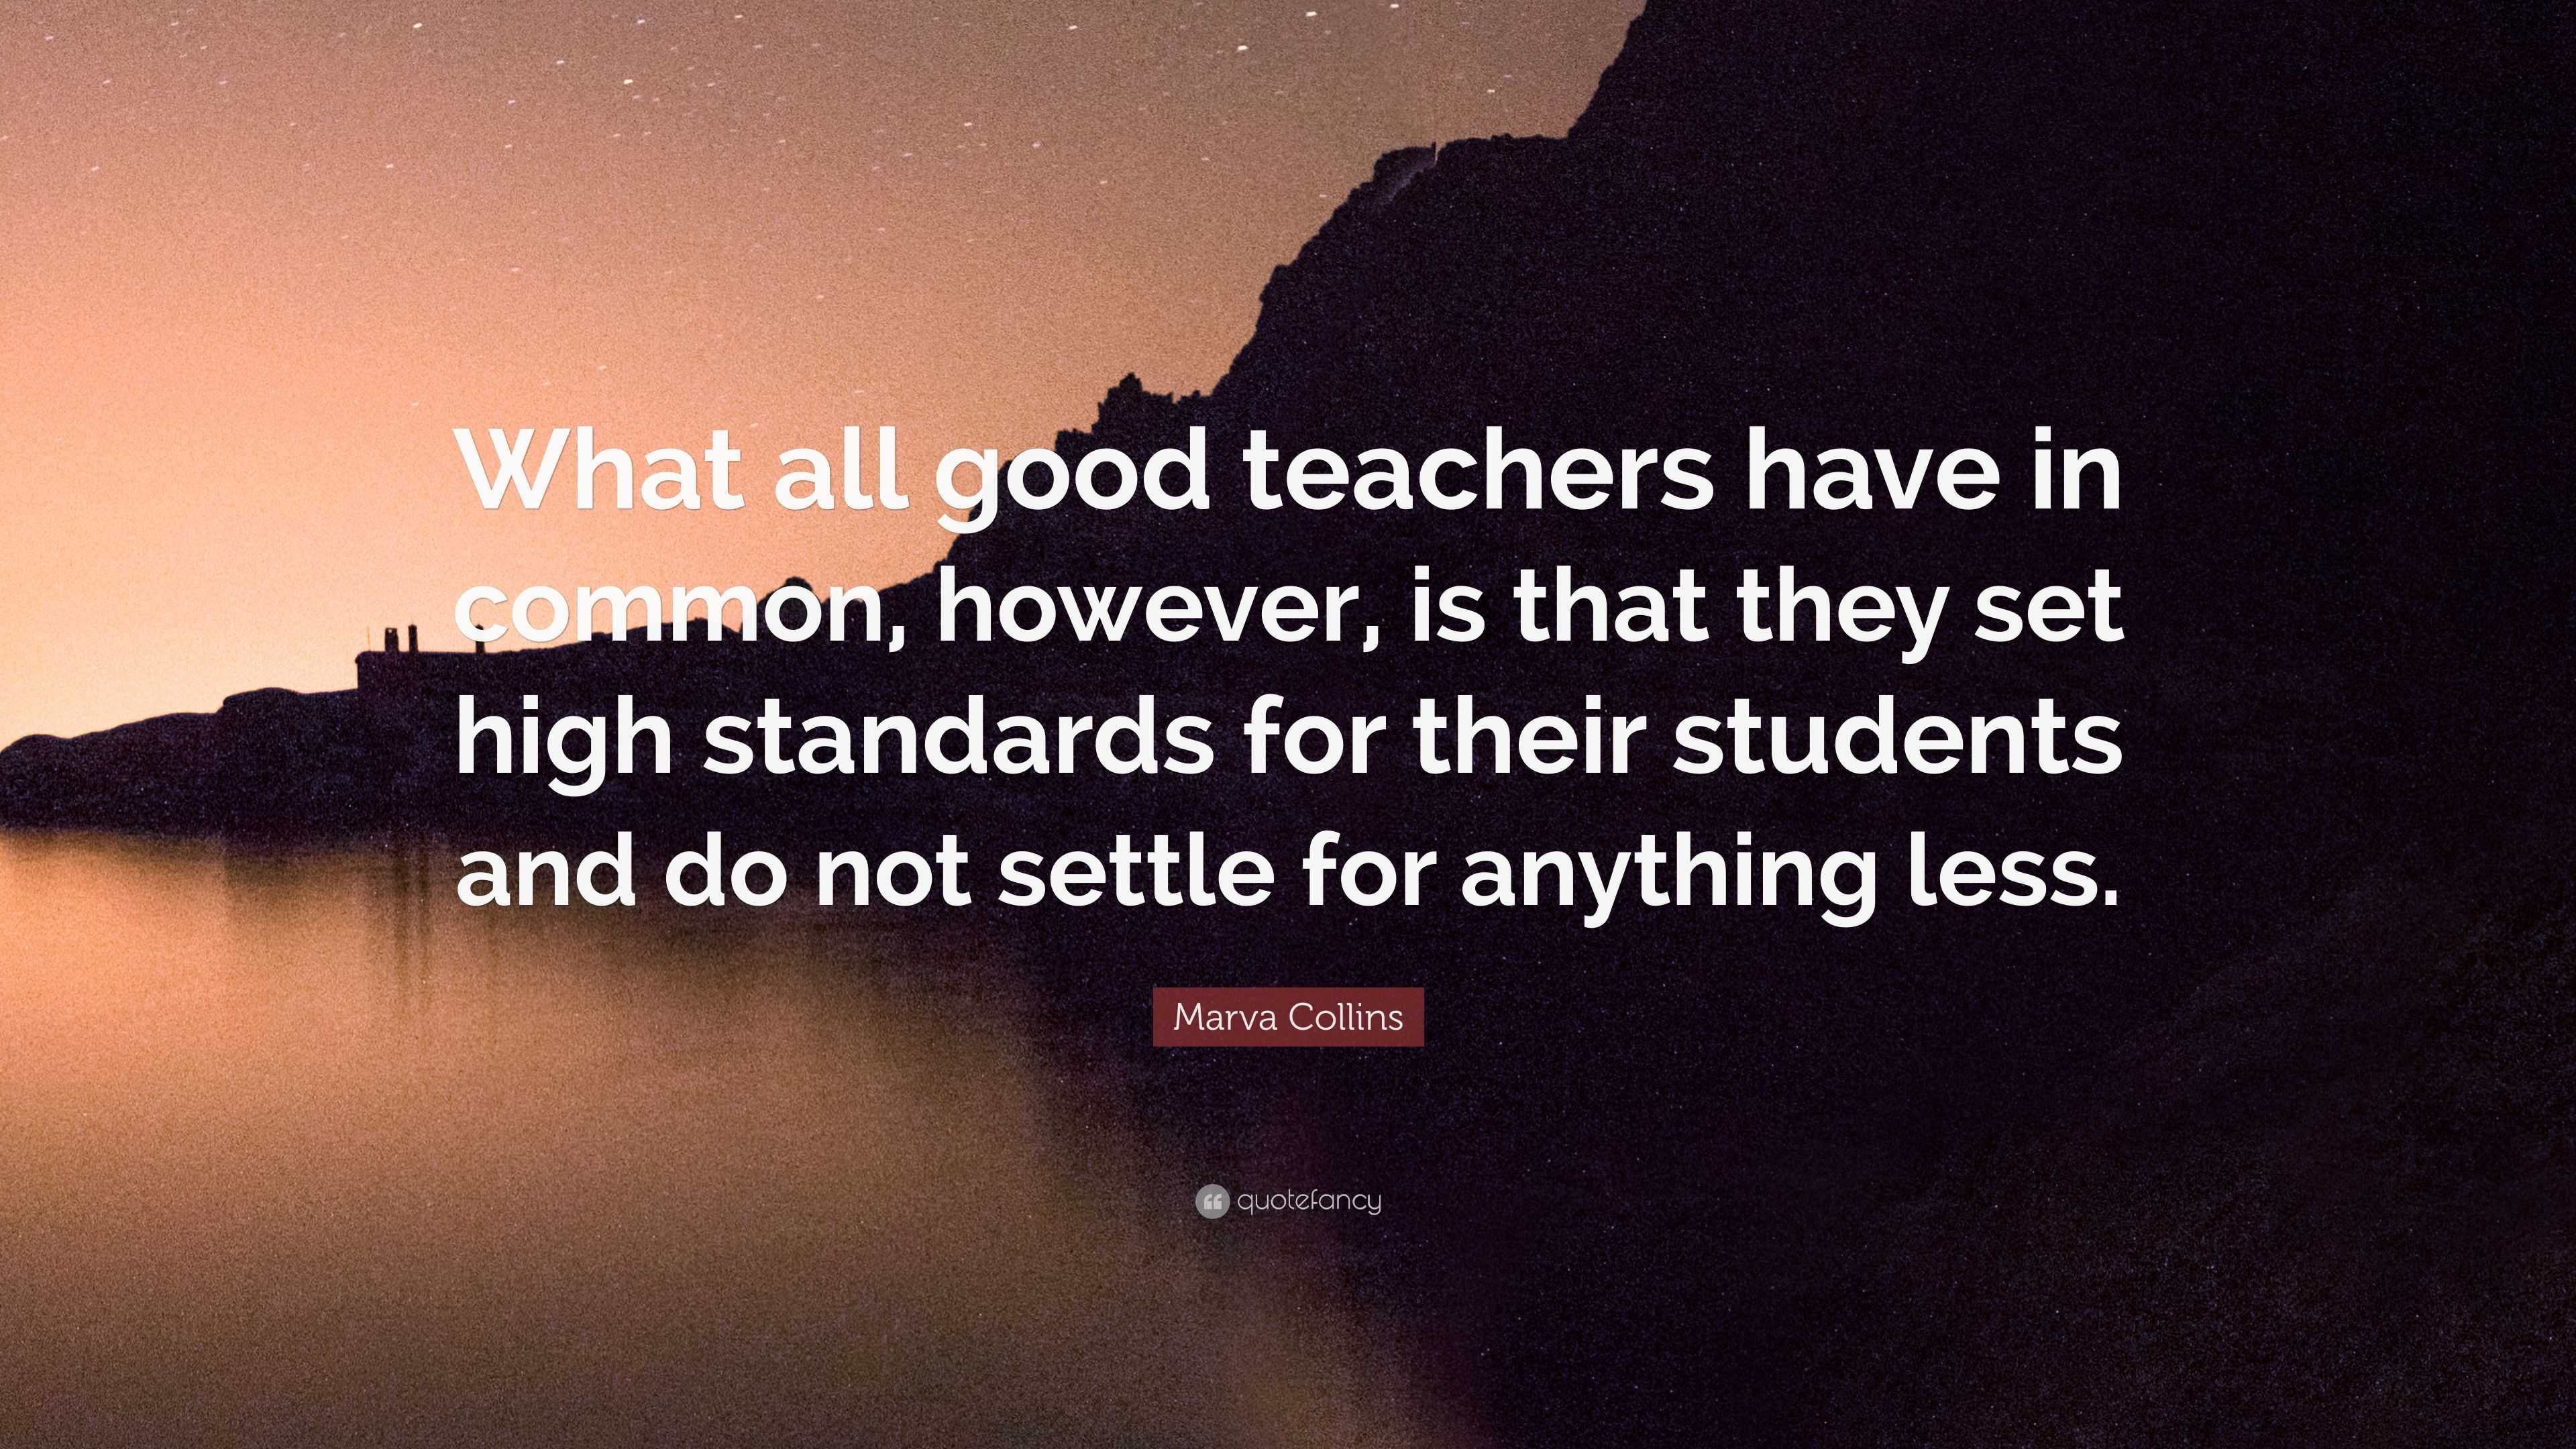 Marva Collins Quote: “What all good teachers have in common, however ...